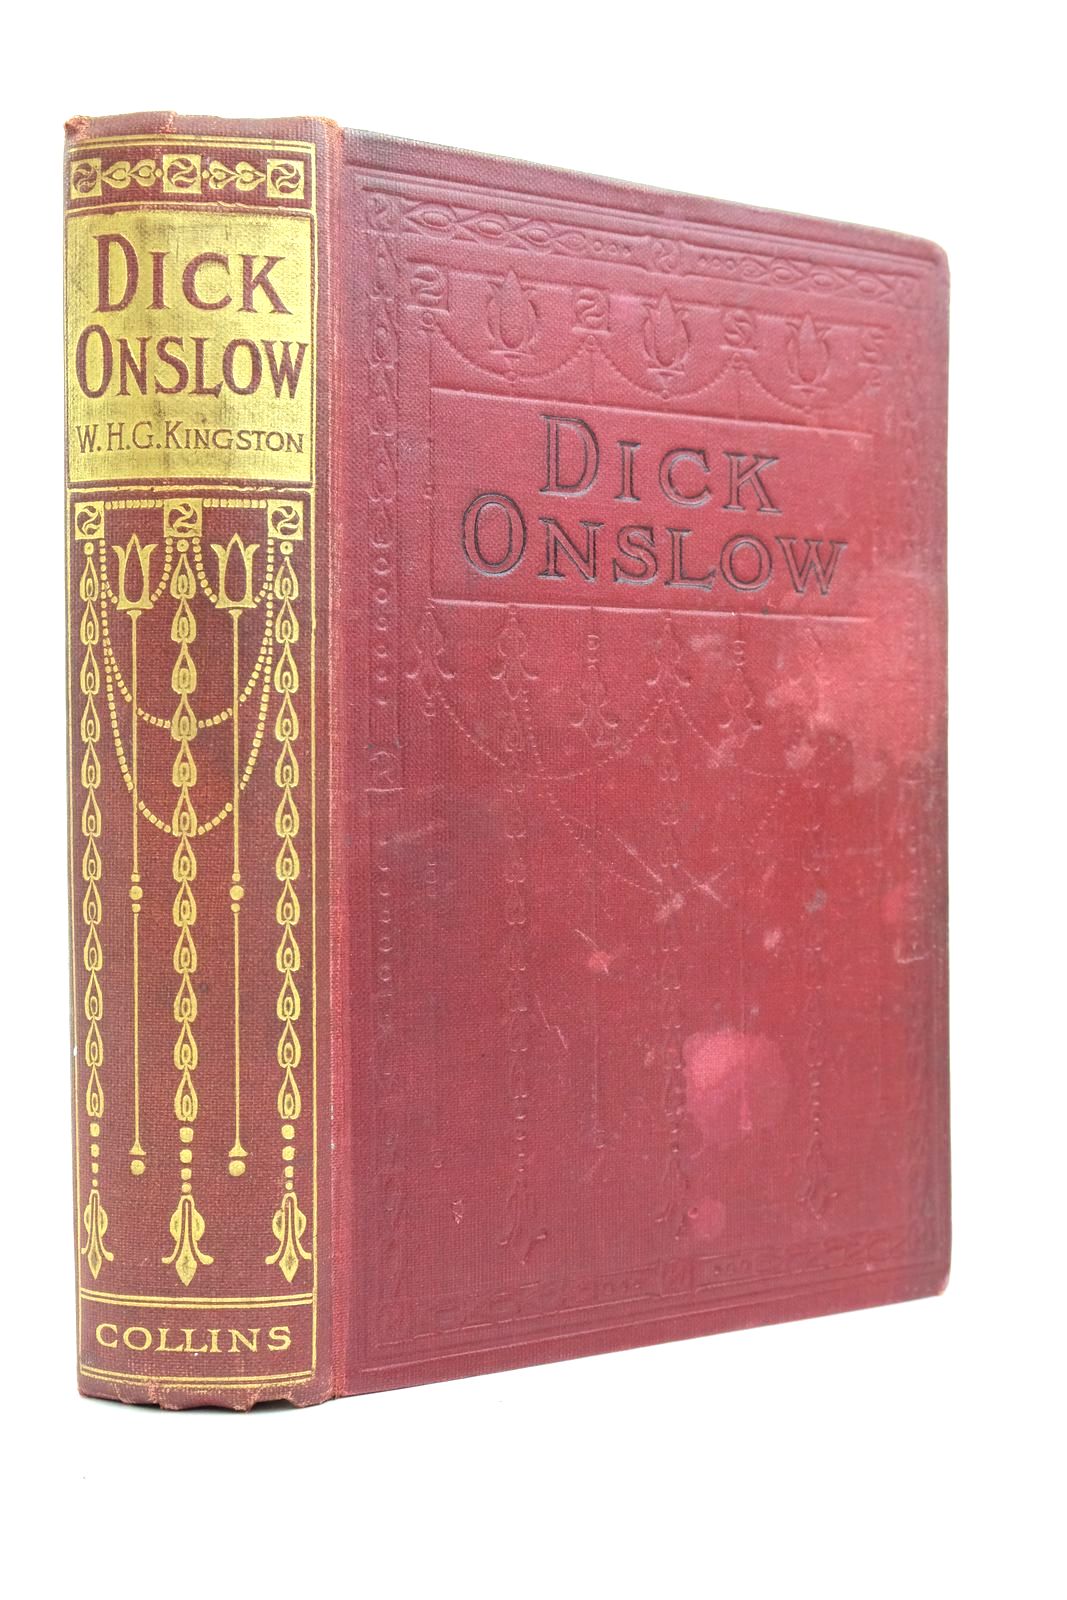 Photo of ADVENTURES OF DICK ONSLOW AMONG THE RED INDIANS written by Kingston, W.H.G. illustrated by Soper, George published by Collins Clear-Type Press (STOCK CODE: 2134724)  for sale by Stella & Rose's Books